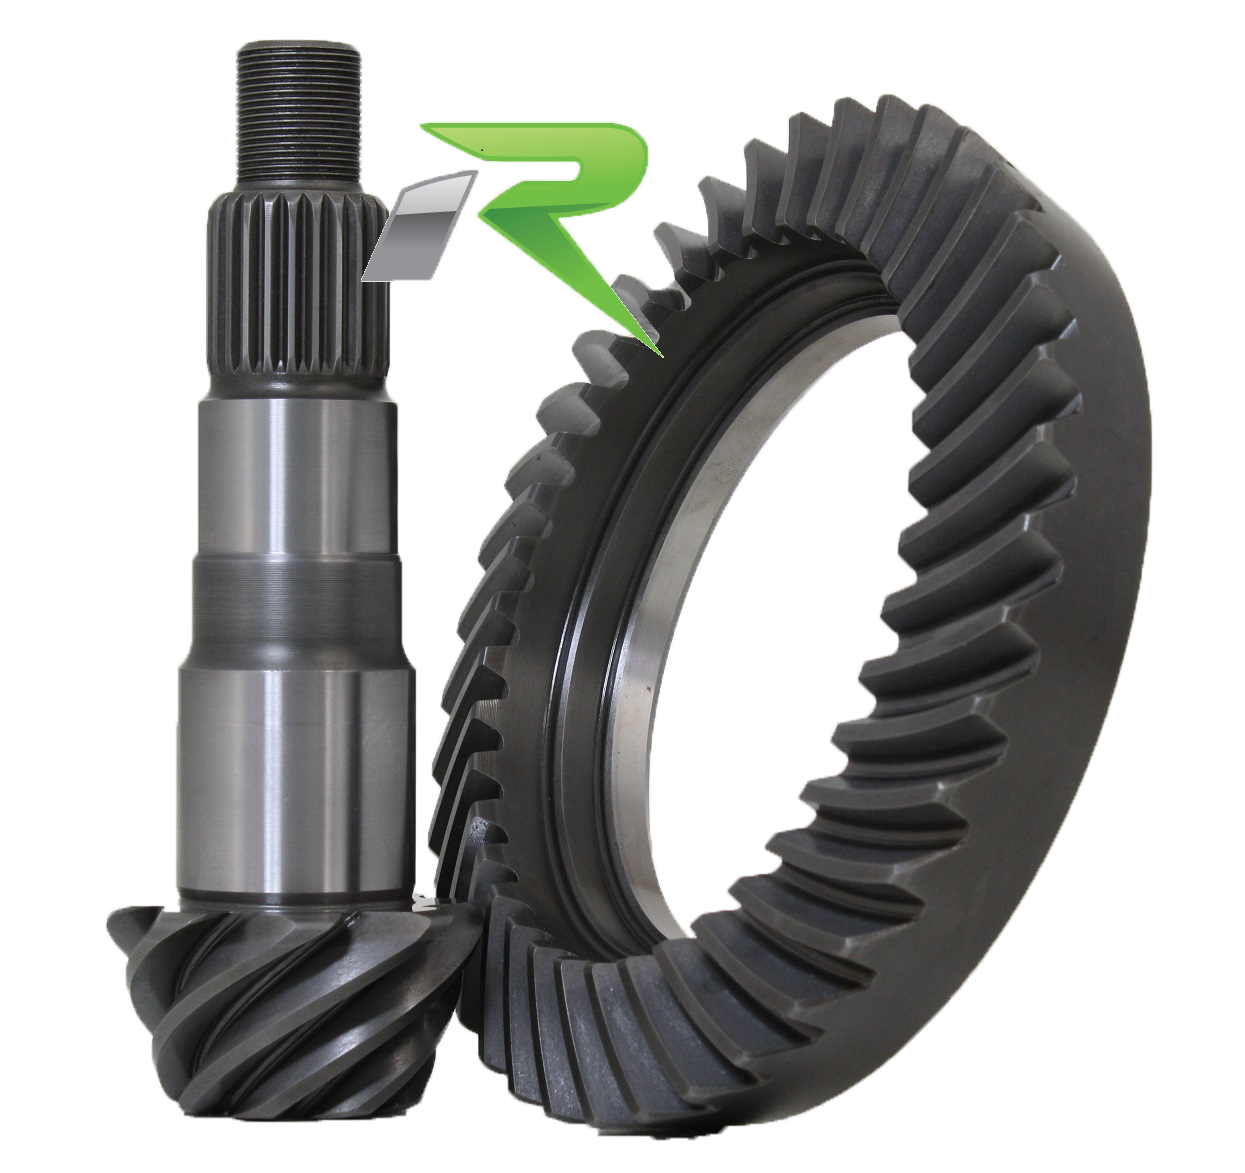 Revolution Gear & Axle Front Ring And Pinion, Dana 30 186Mm Reverse, 5.38 Ratio For 2018-2020 Jeep